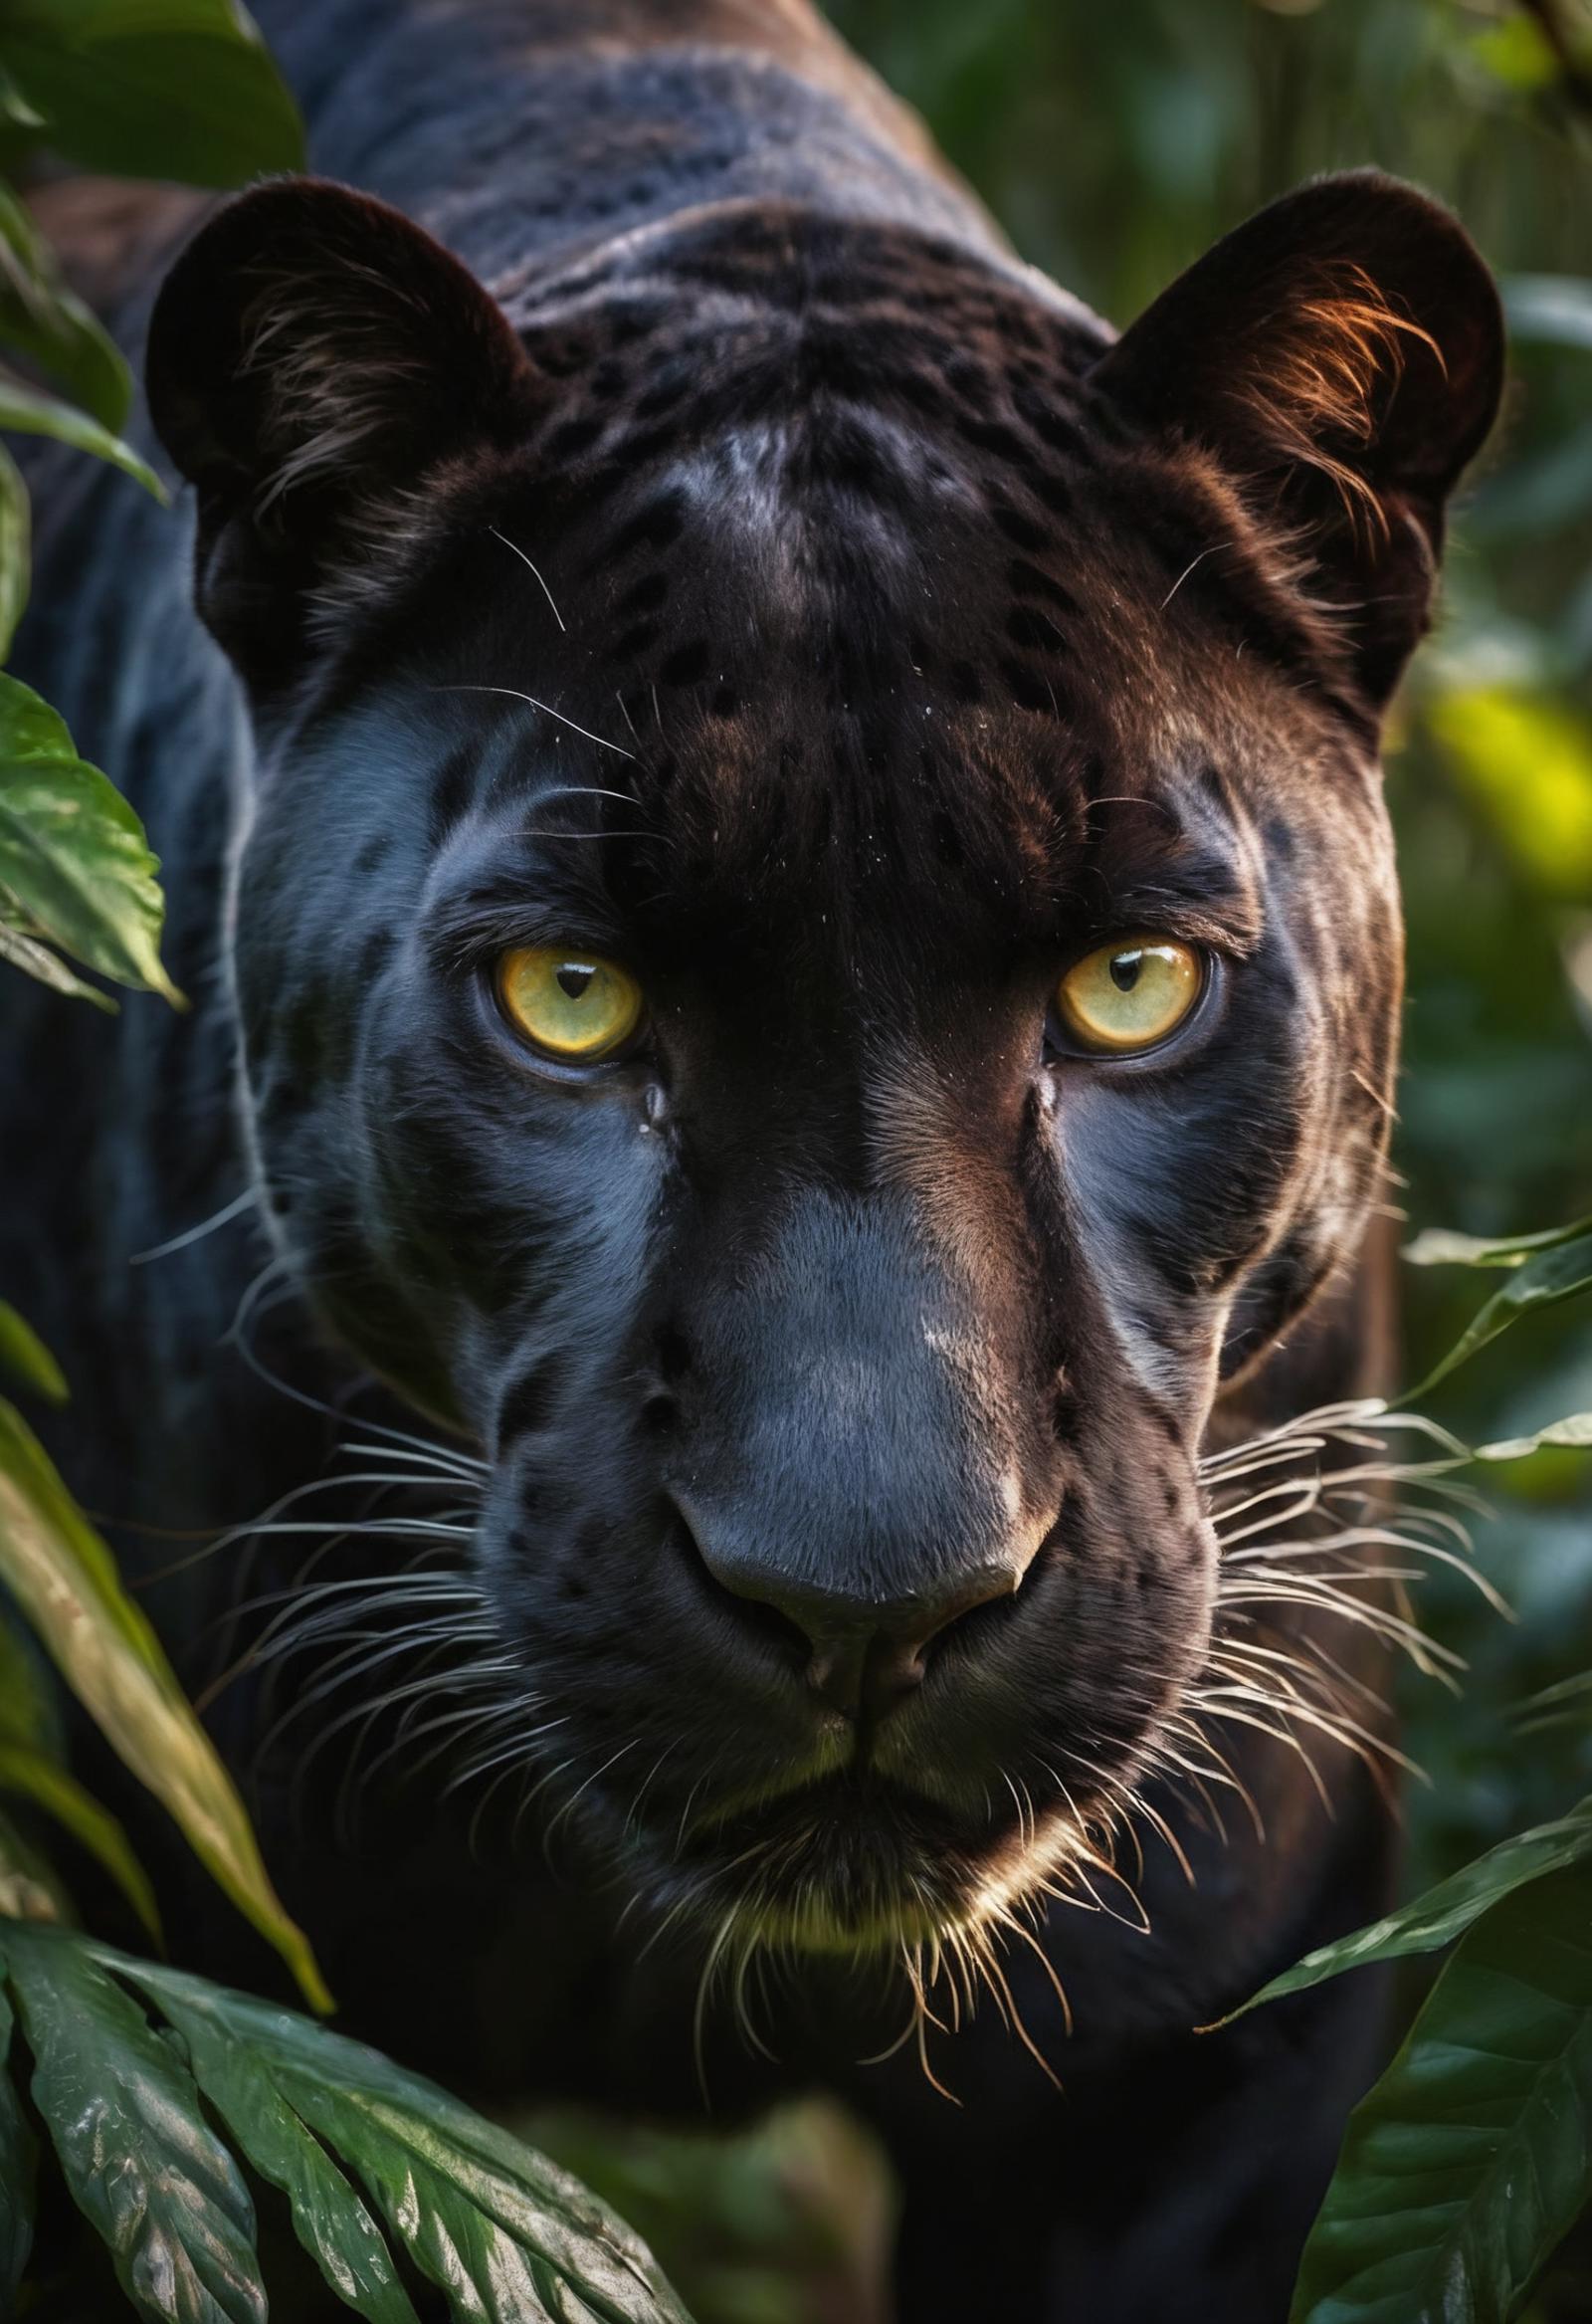 A close-up of a black tiger with yellow eyes, looking into the camera.